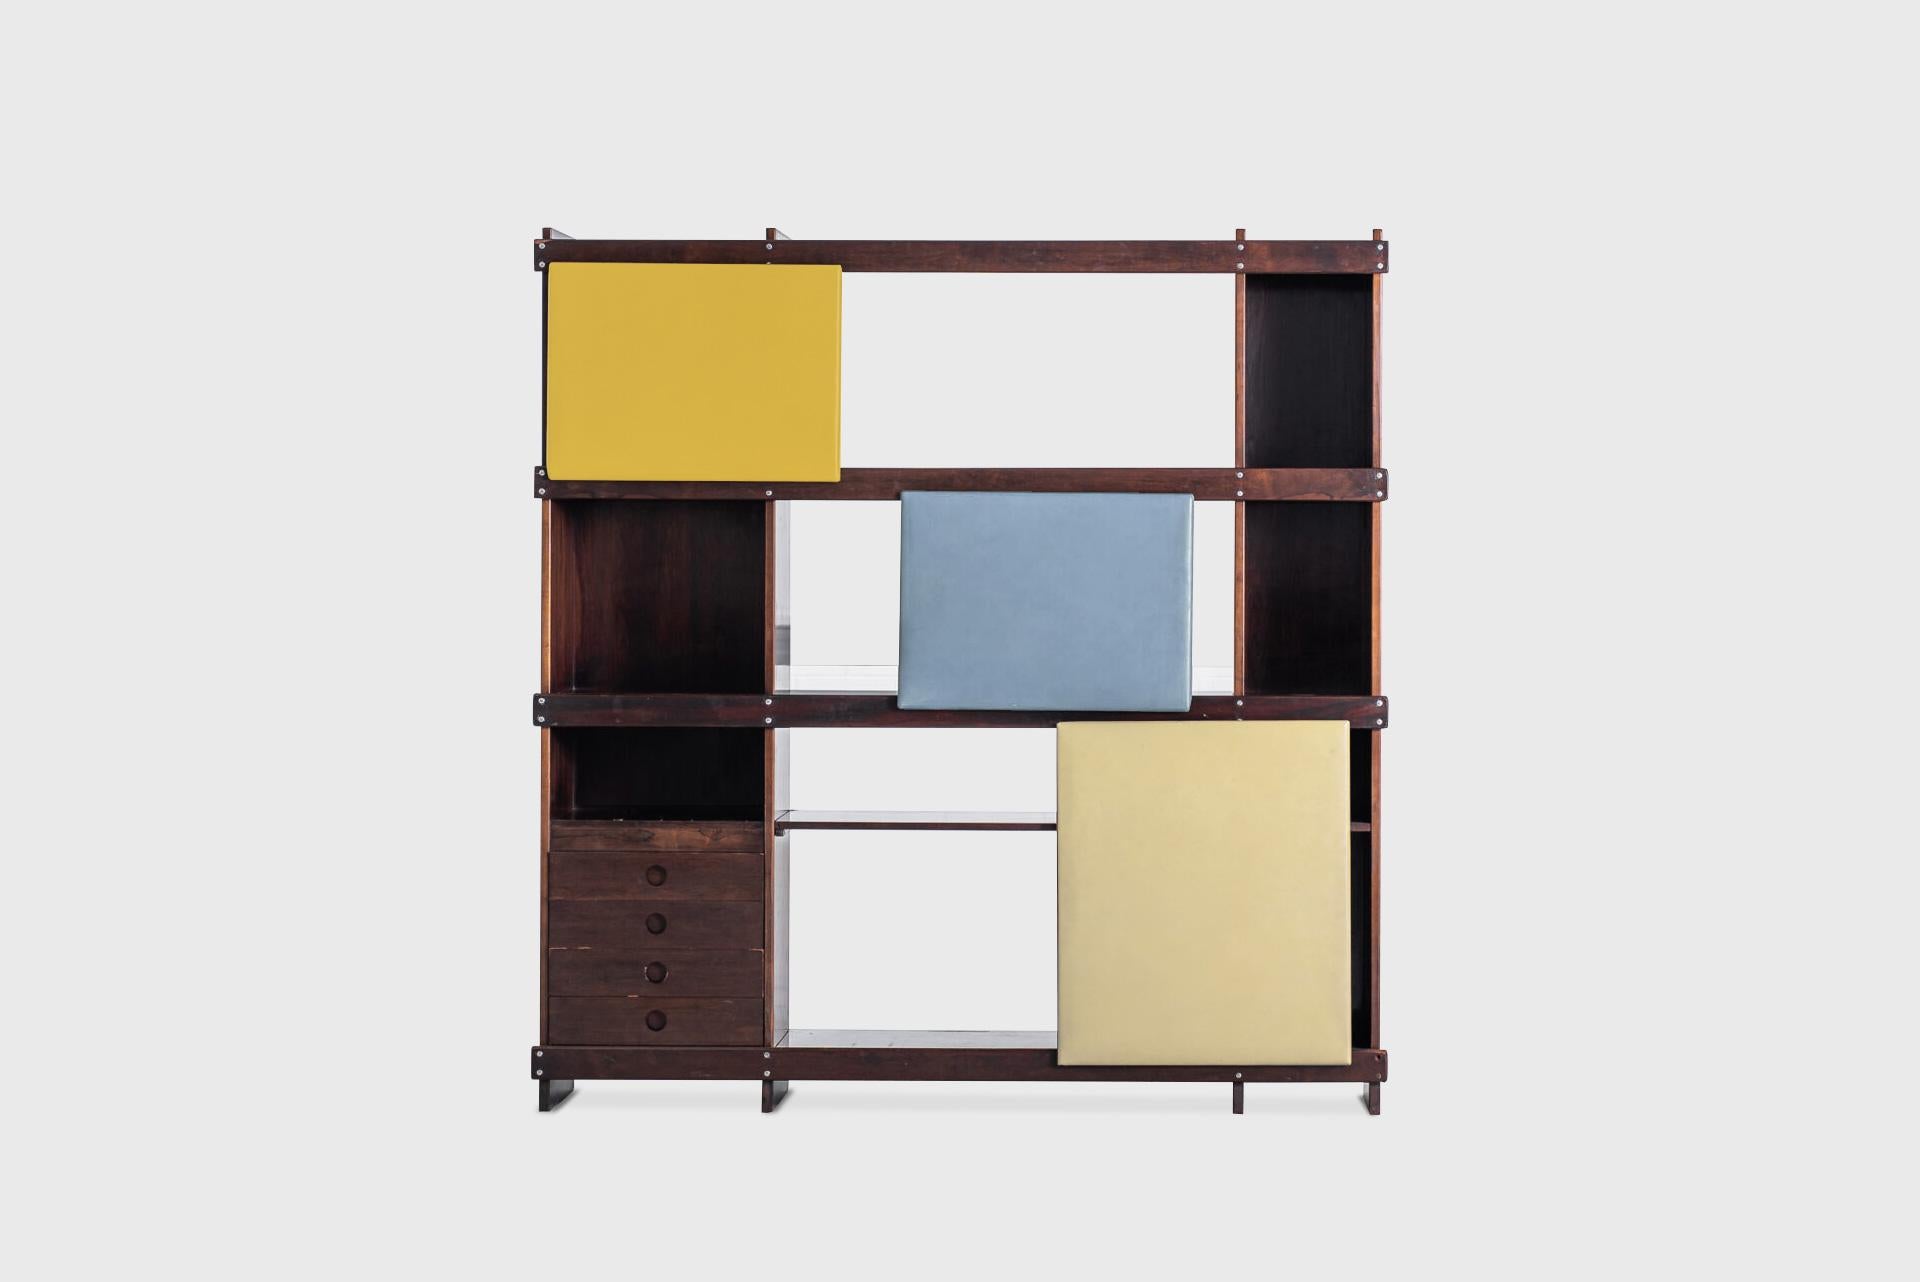 Bookcase model “Adolpho”
Manufactured by Sergio Rodrigues Brazil, 1960
Jacaranda, leather panels
Measurements
203 x 43 x 210h cm 79,9 x 16,9 x 82,7h in
